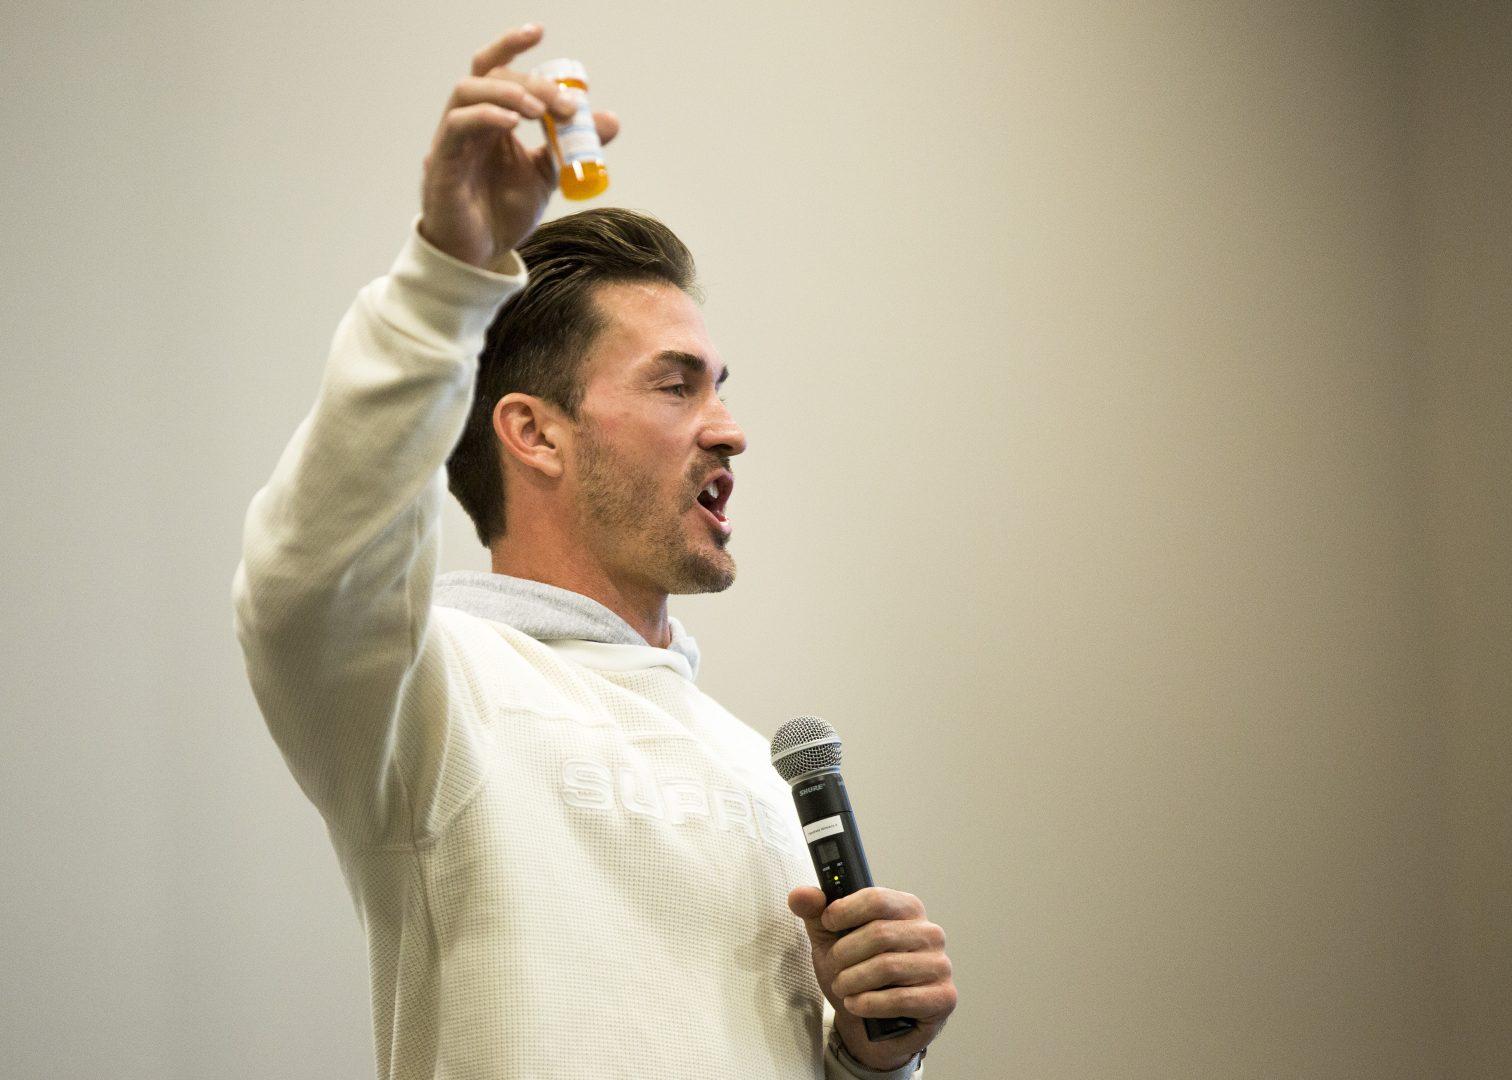 .Motivational speaker Tony Hoffman holds up an empty prescription bottle for Oxycontin as he speaks about the insidious nature of addiction to prescription medication during the “Substance Use” panel held in the North Gym on Feb. 22, 2018. (Ramuel Reyes/The Collegian)